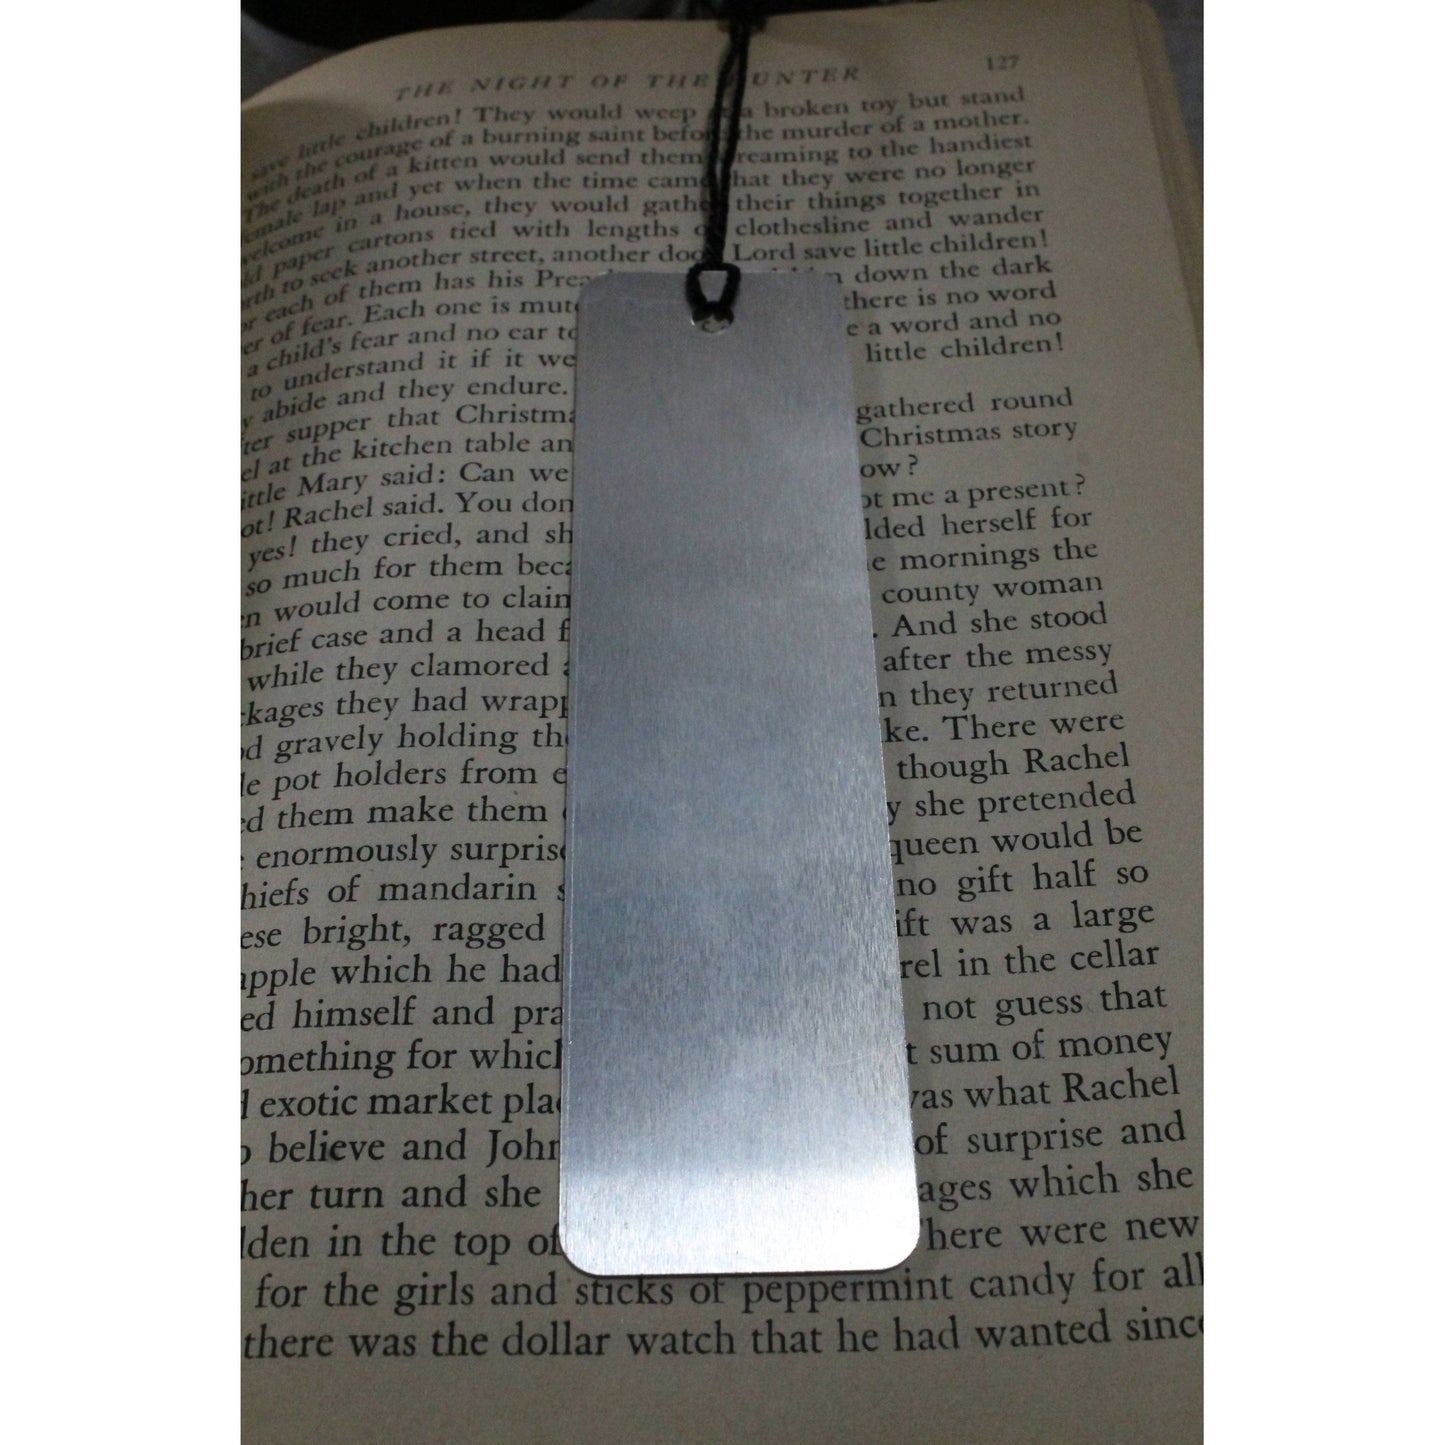 Is That Smut? Metal Bookmark | Book Marker for Book Lovers Bibliophile